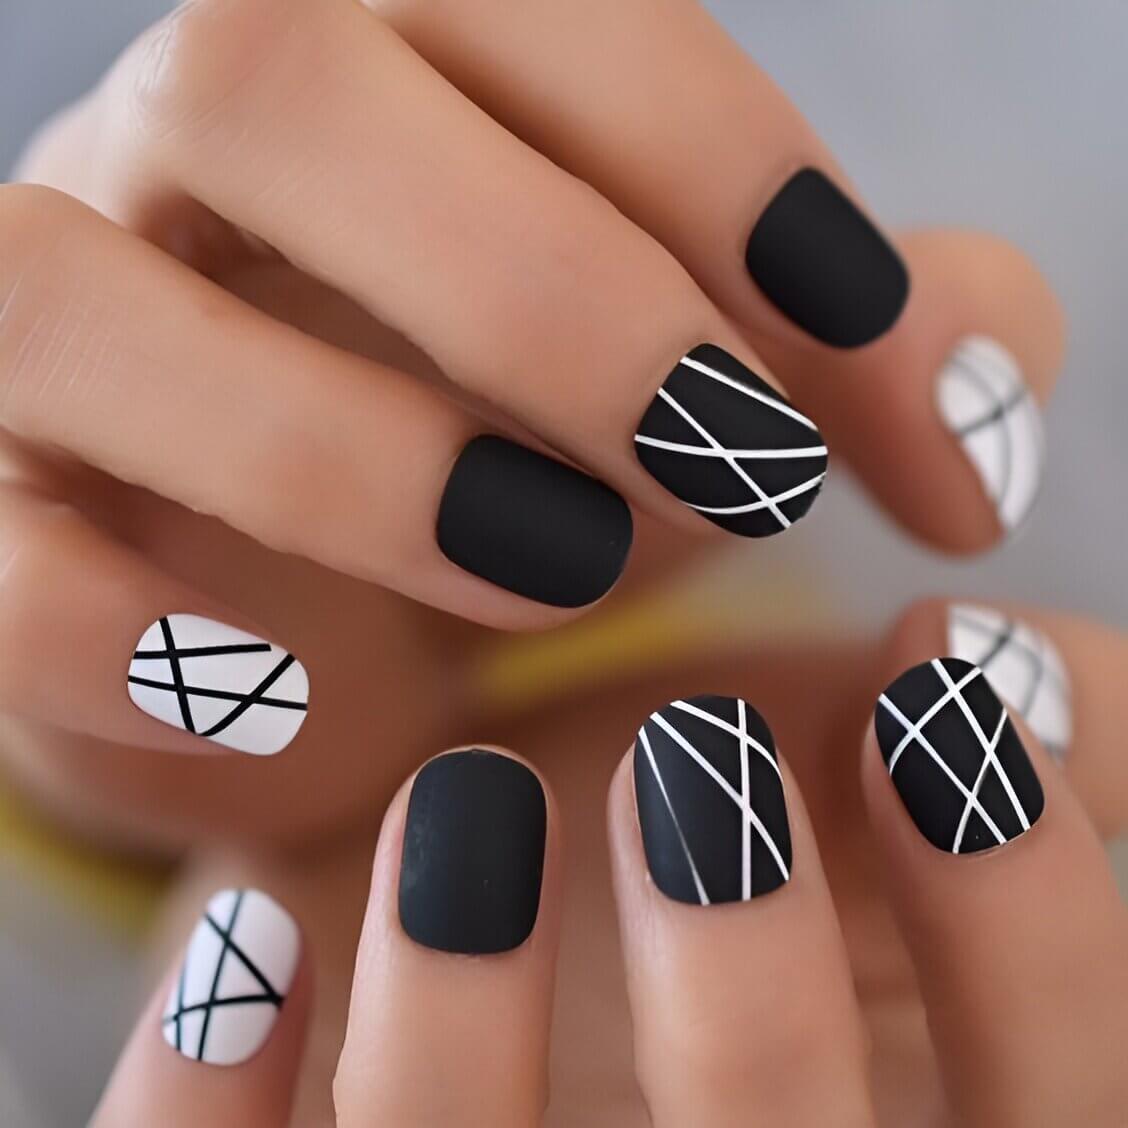 30 Classy Black Nail Designs To Glam You Up - 219